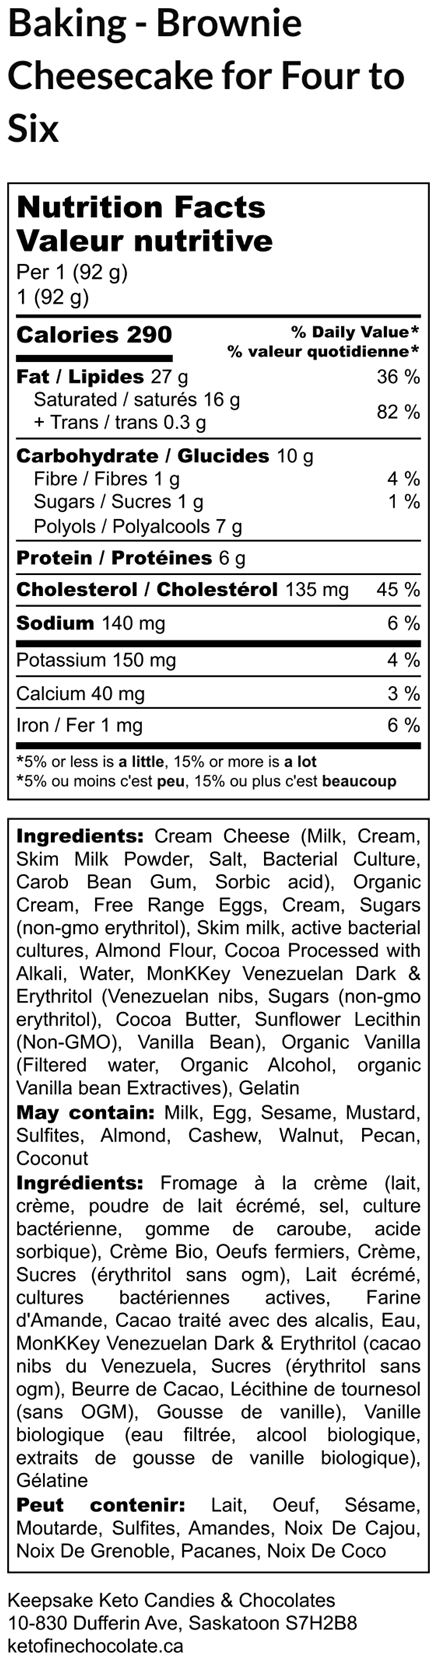 Brownie Cheesecake_nutri-facts